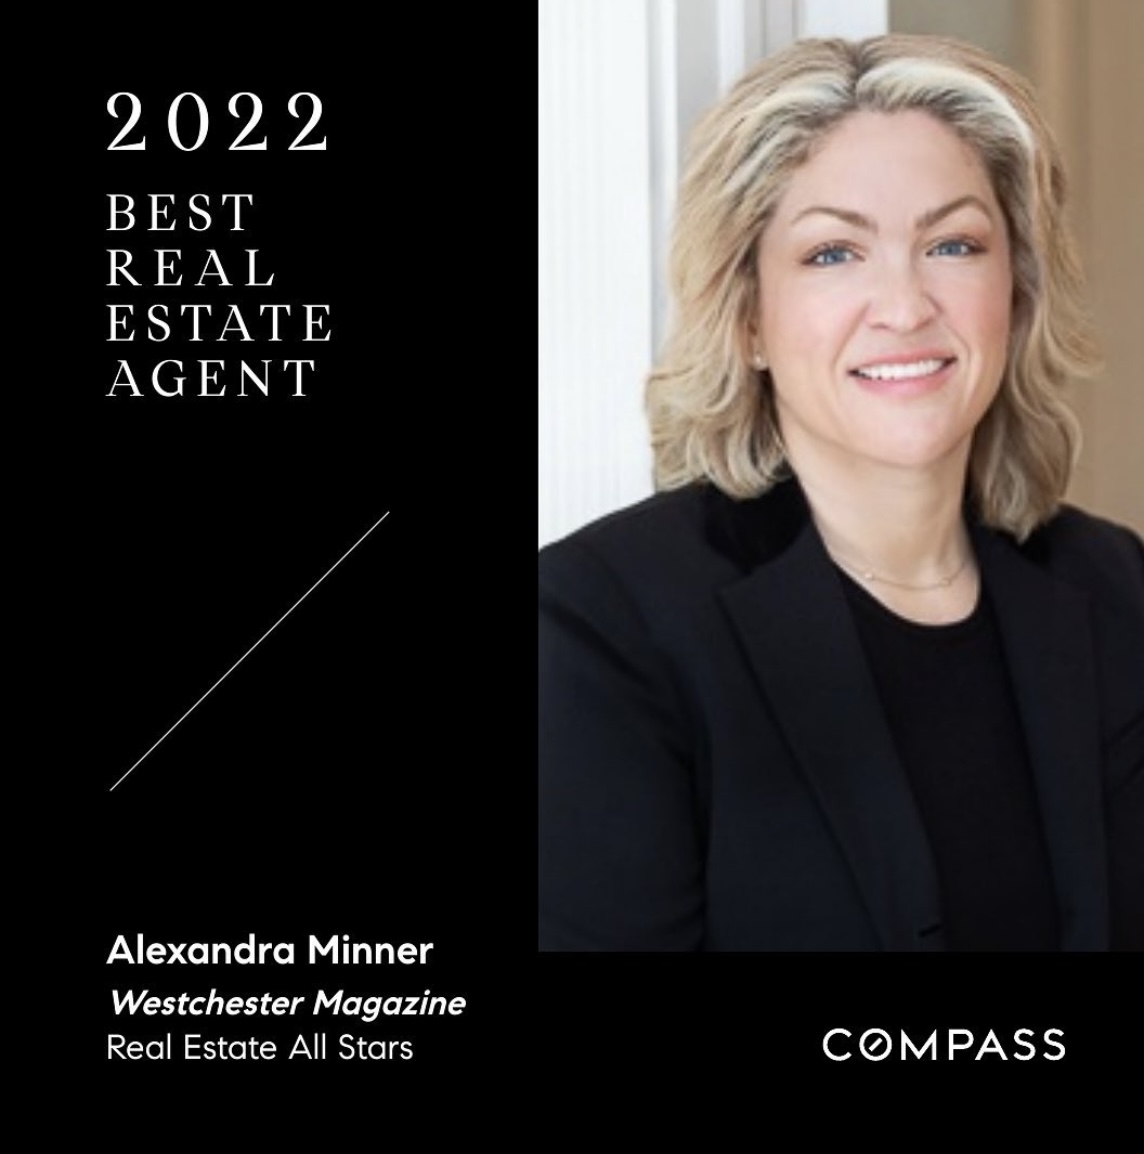 These Are the Best Real Estate Agents in Westchester in 2022